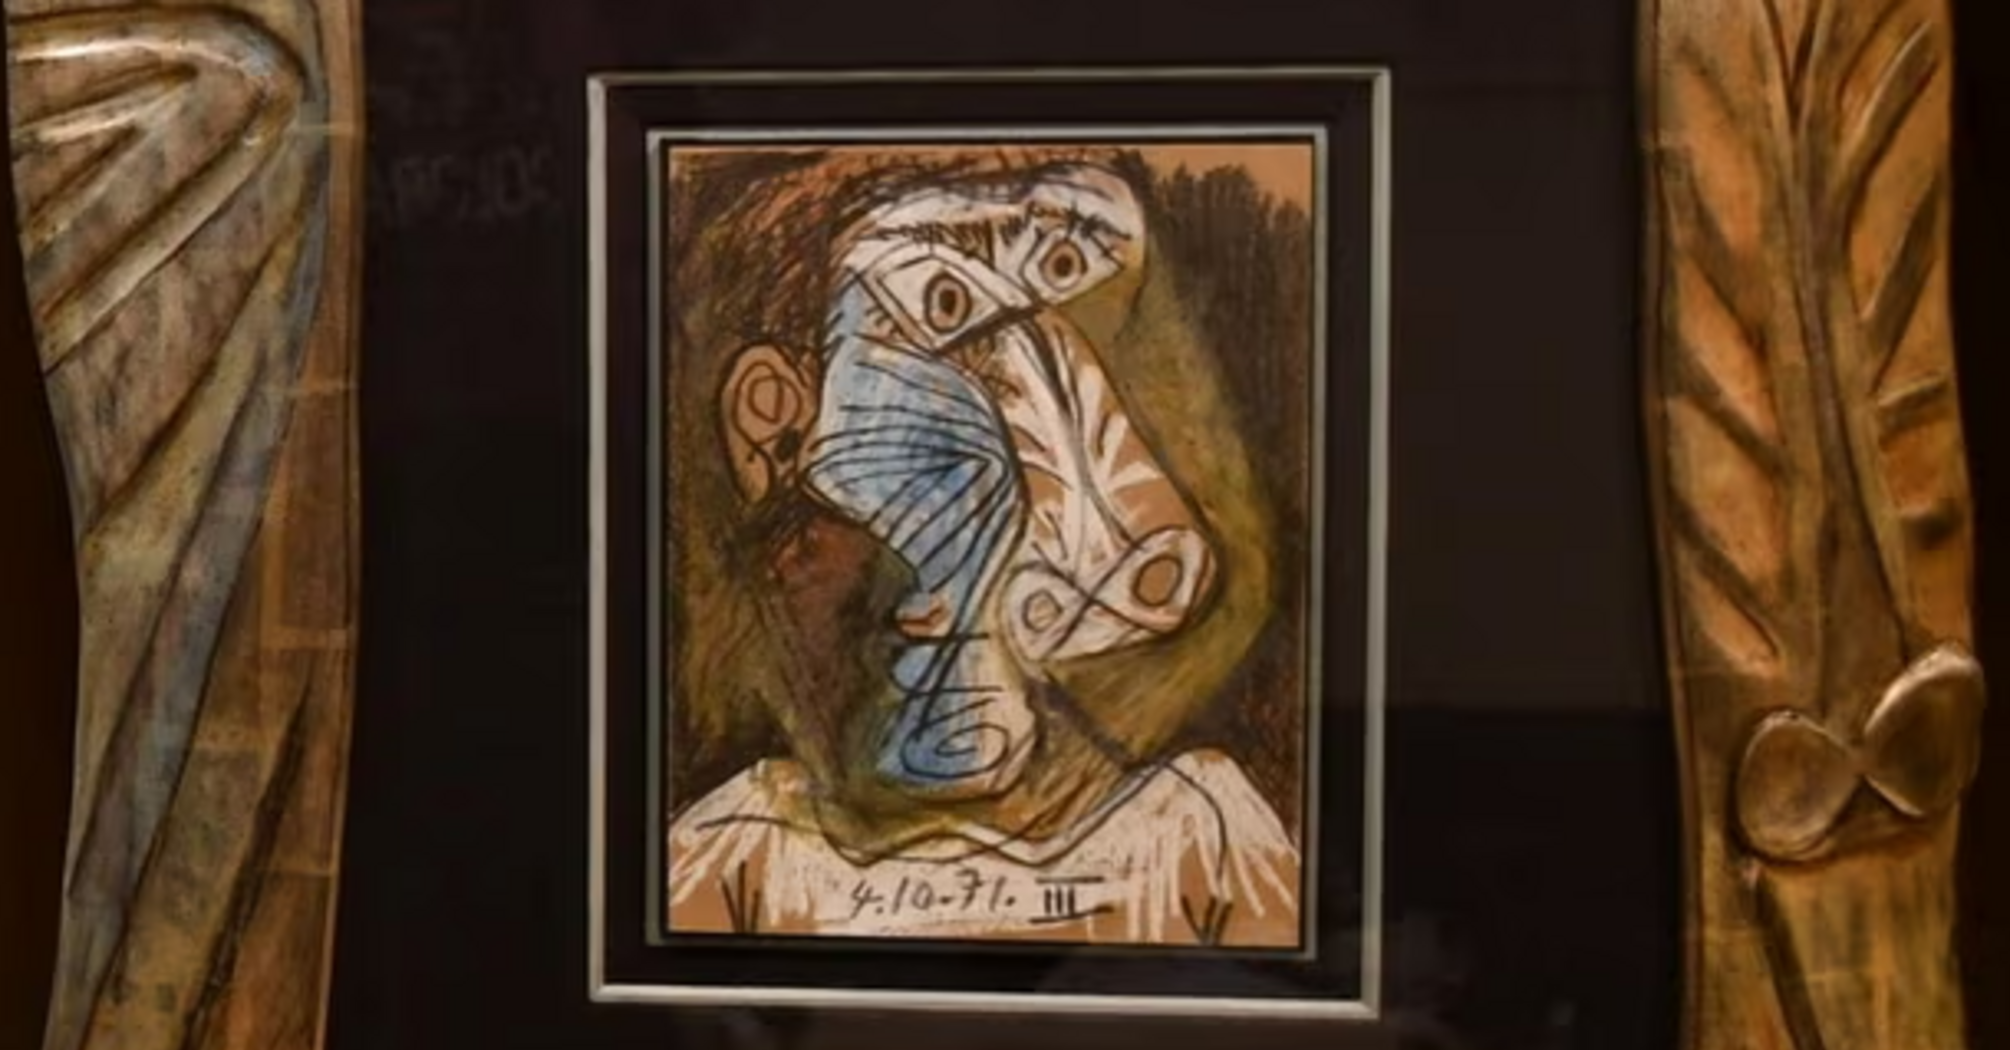 One of the found paintings, Tête by Pablo Picasso